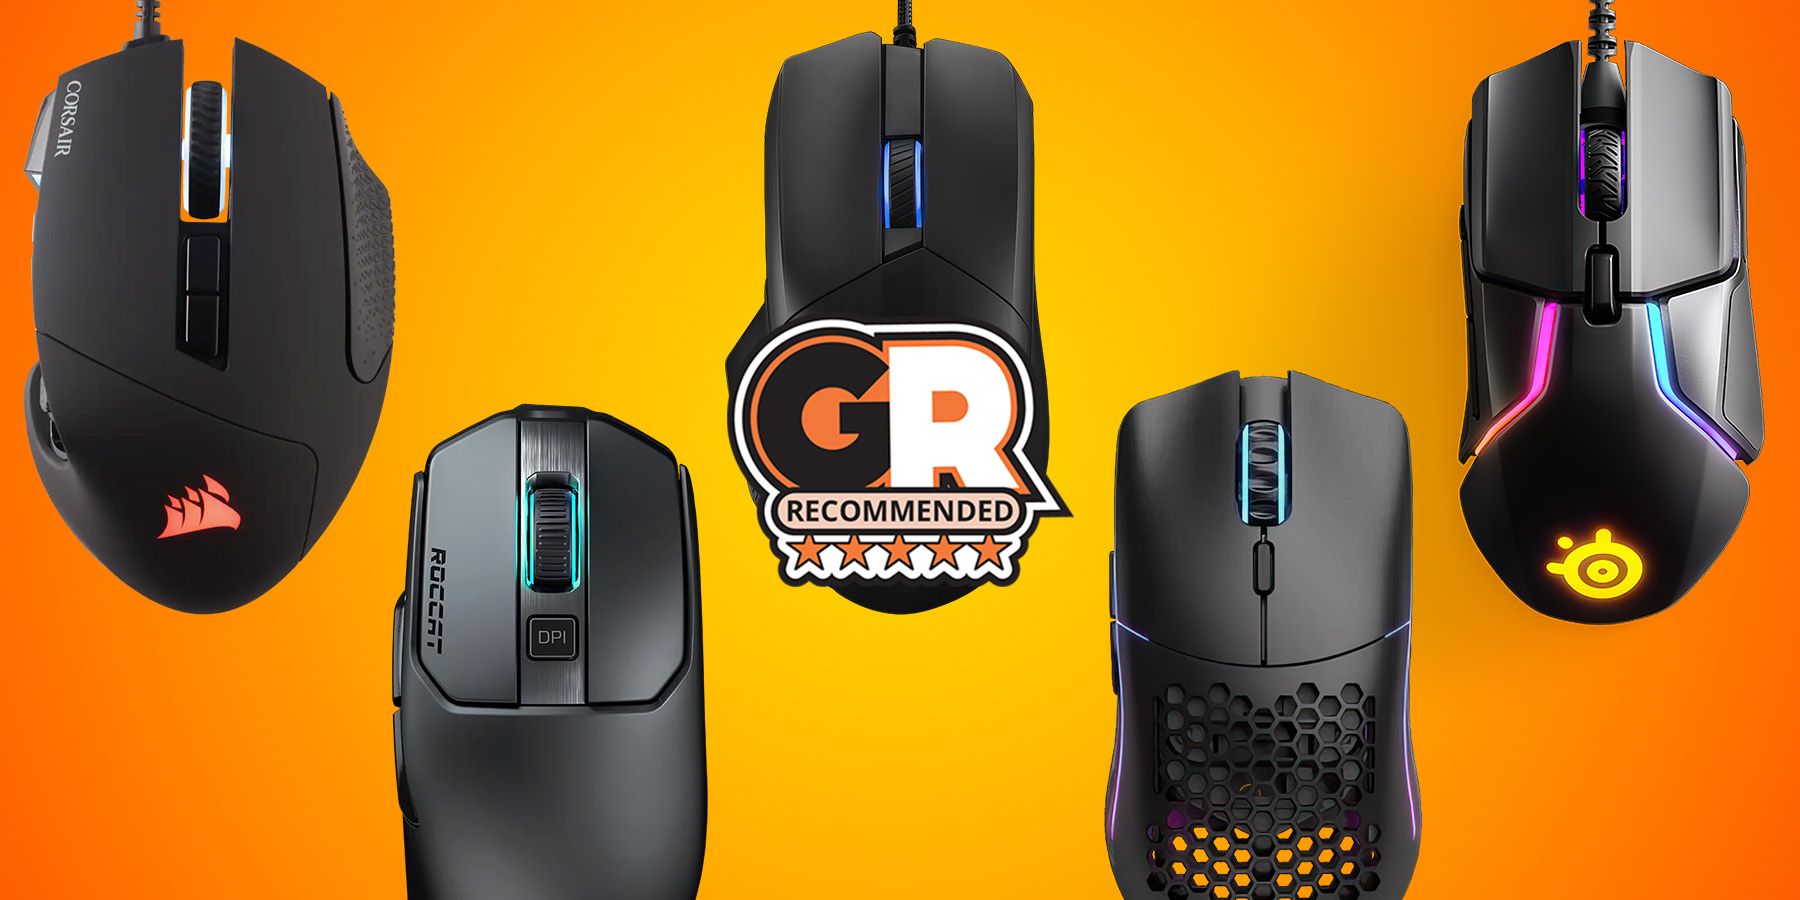 The Best Gaming Mice for Sports Games